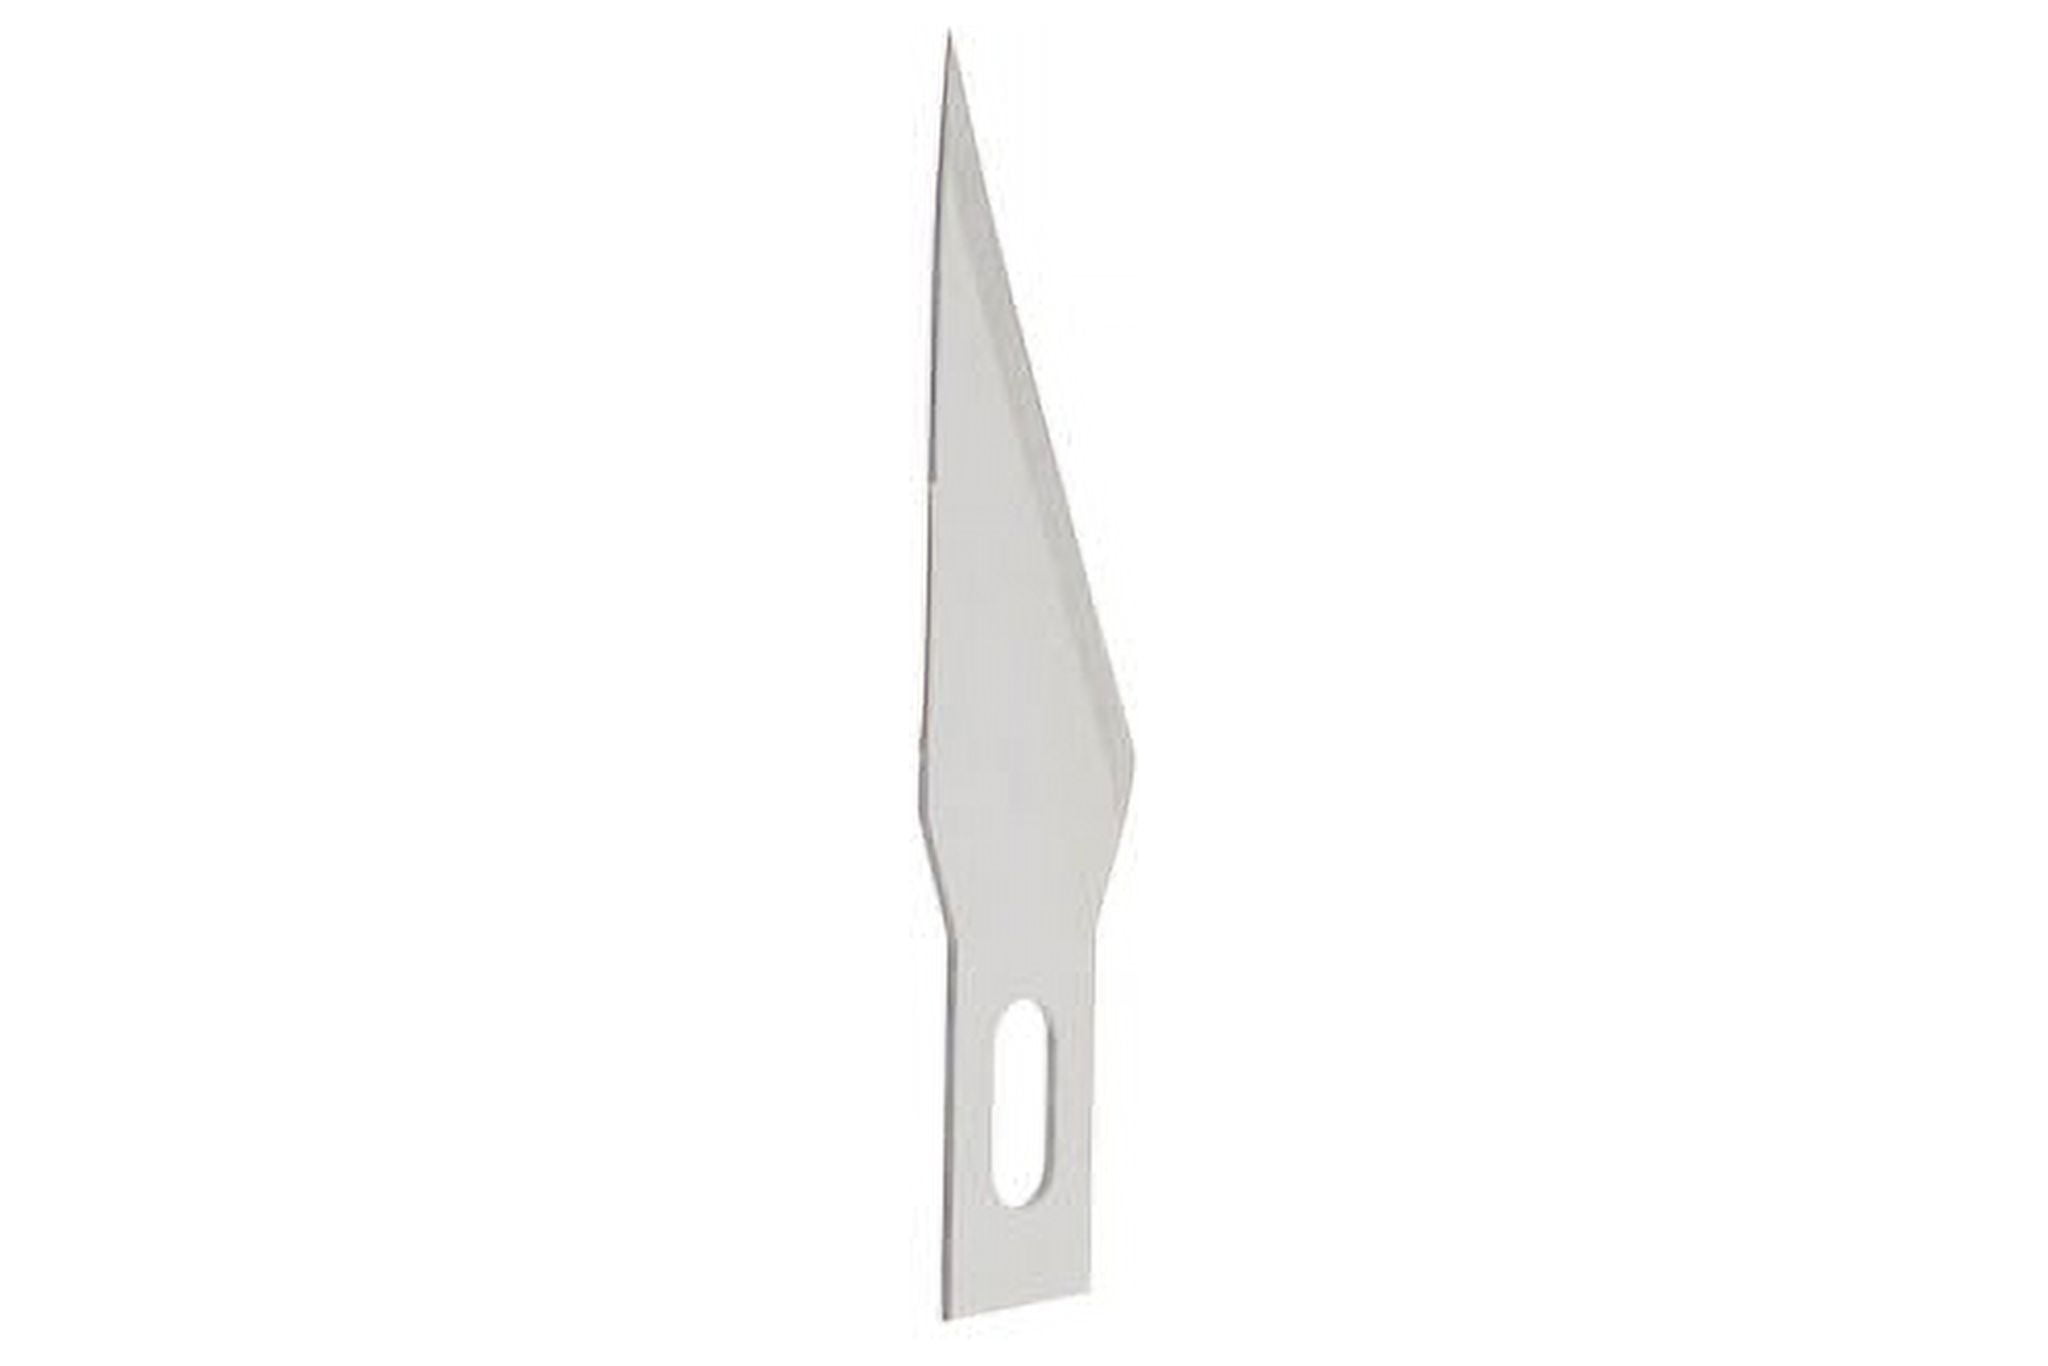 Excel Blades No. 11 Medical-Grade Stainless Steel Scalpel Blades, Pack of 2